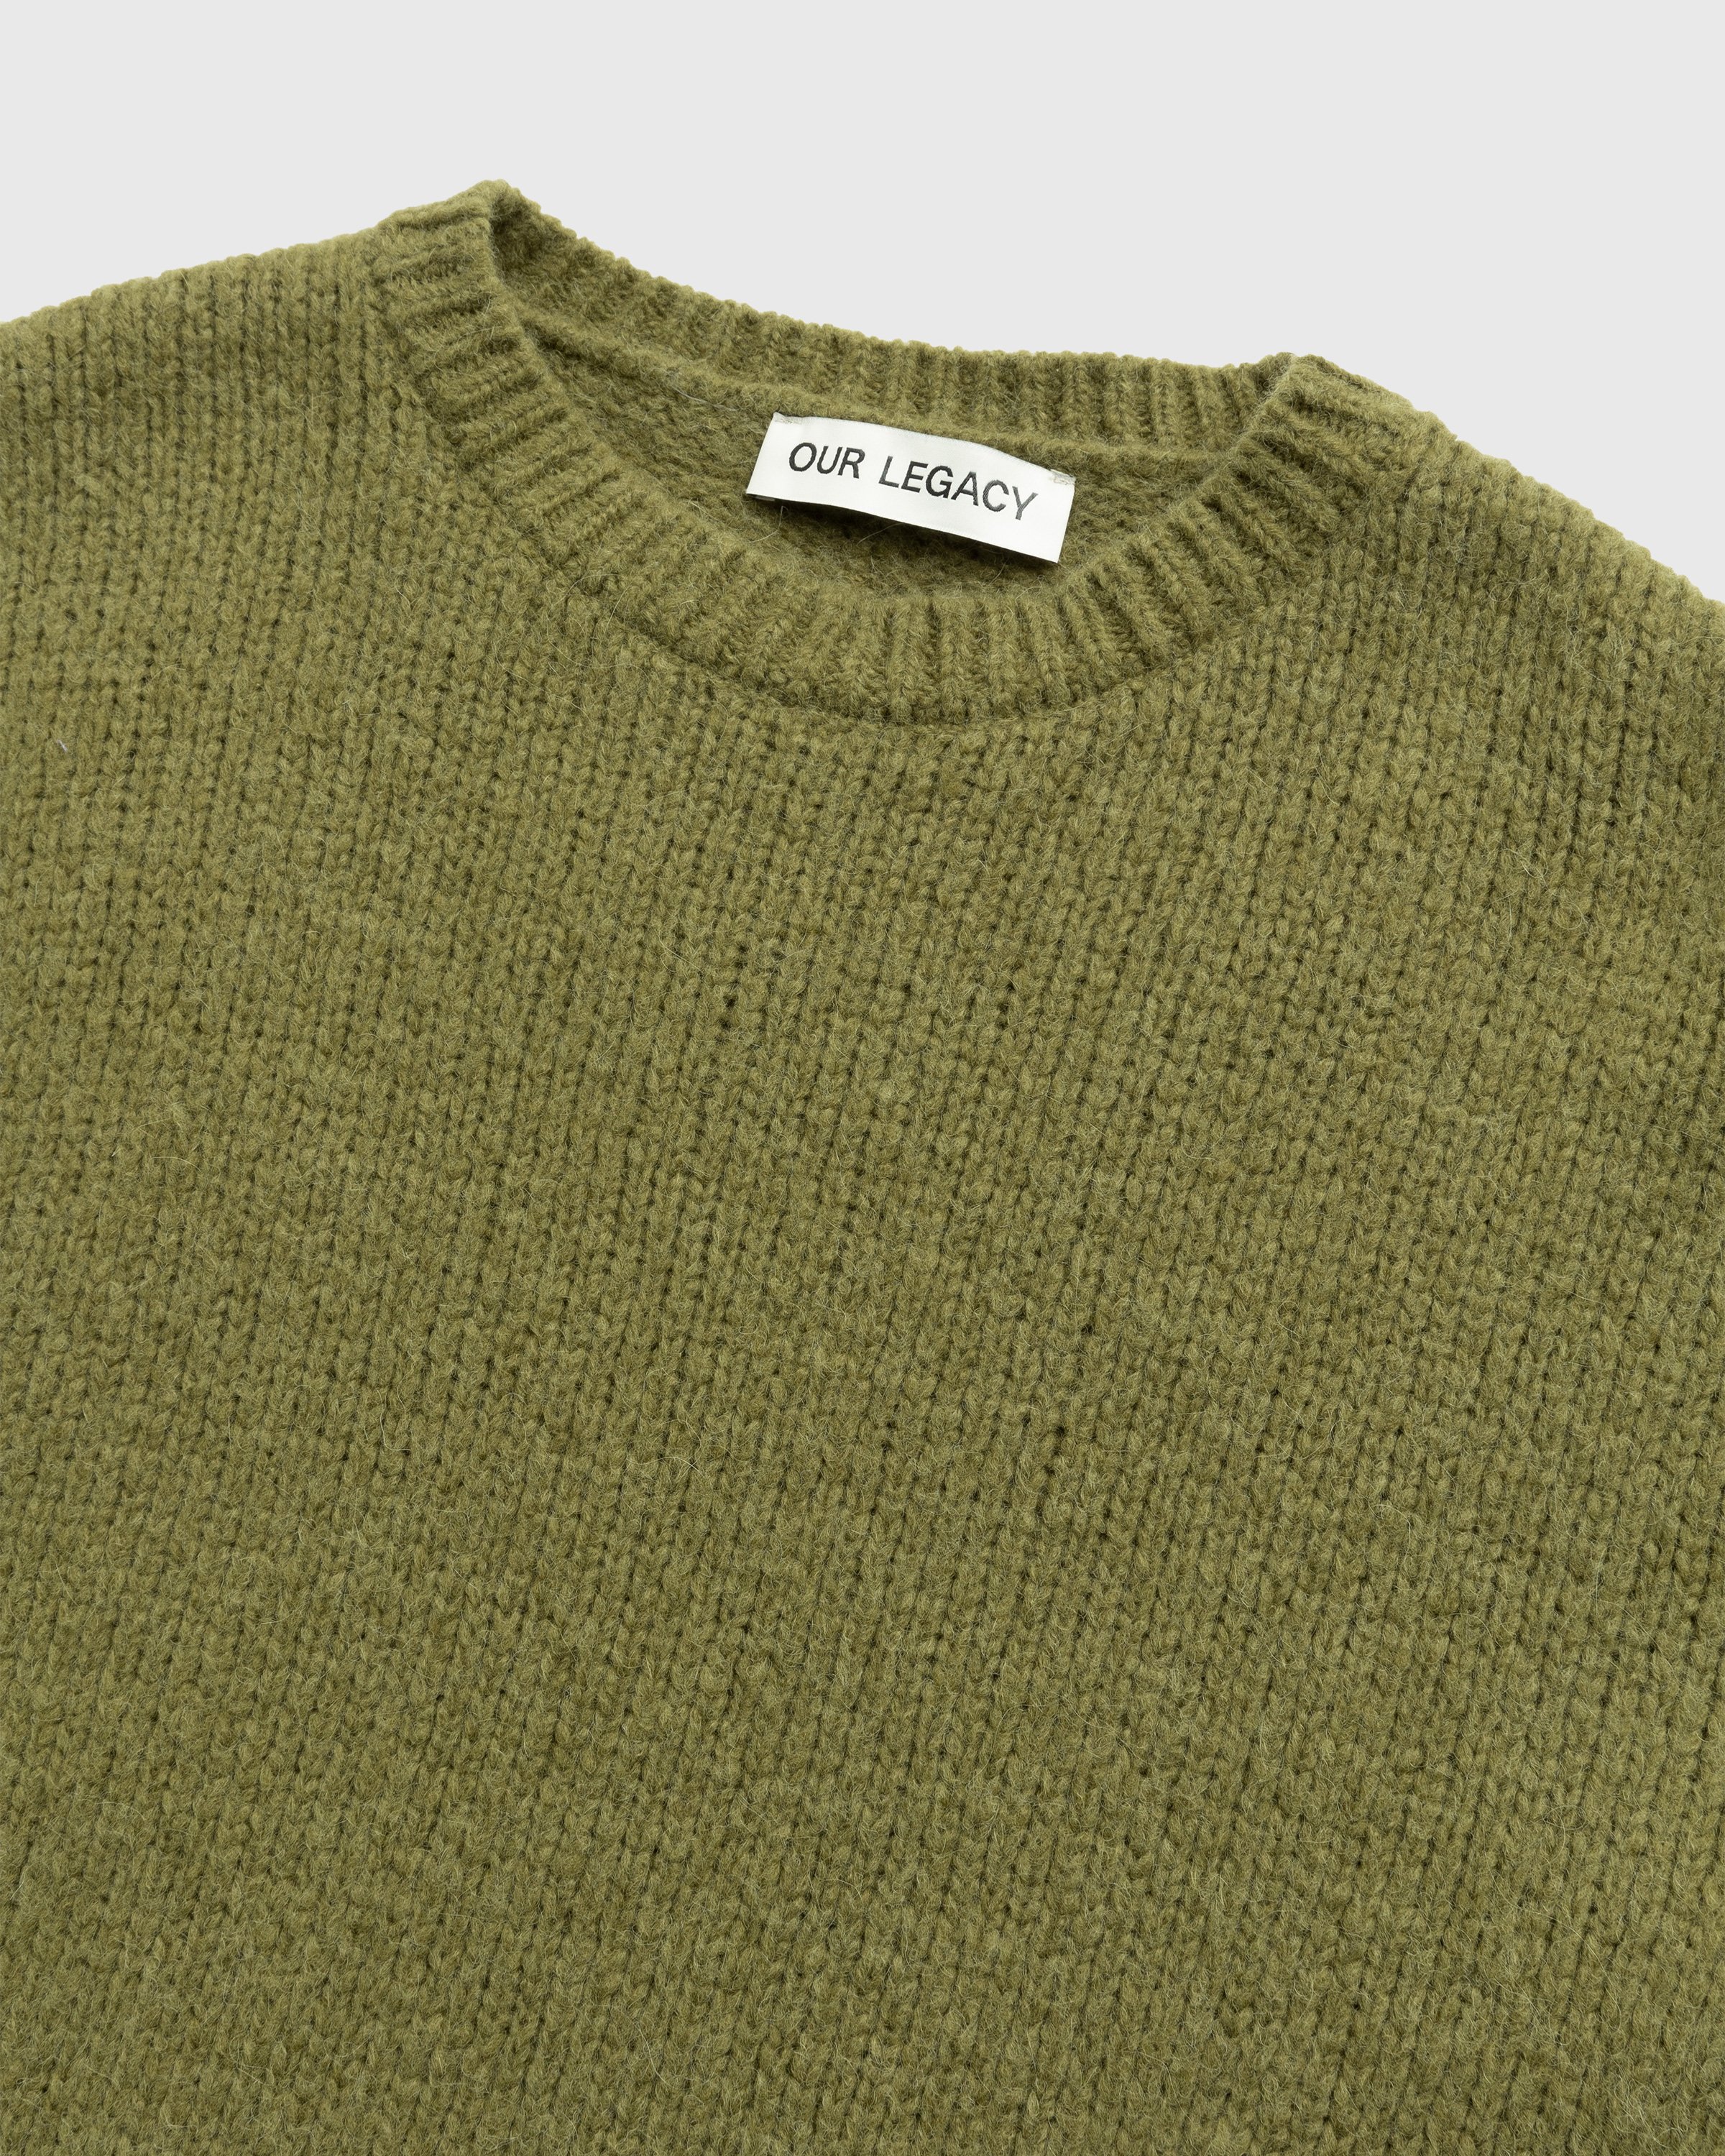 Our Legacy - Popover Roundneck Green - Clothing - Green - Image 3